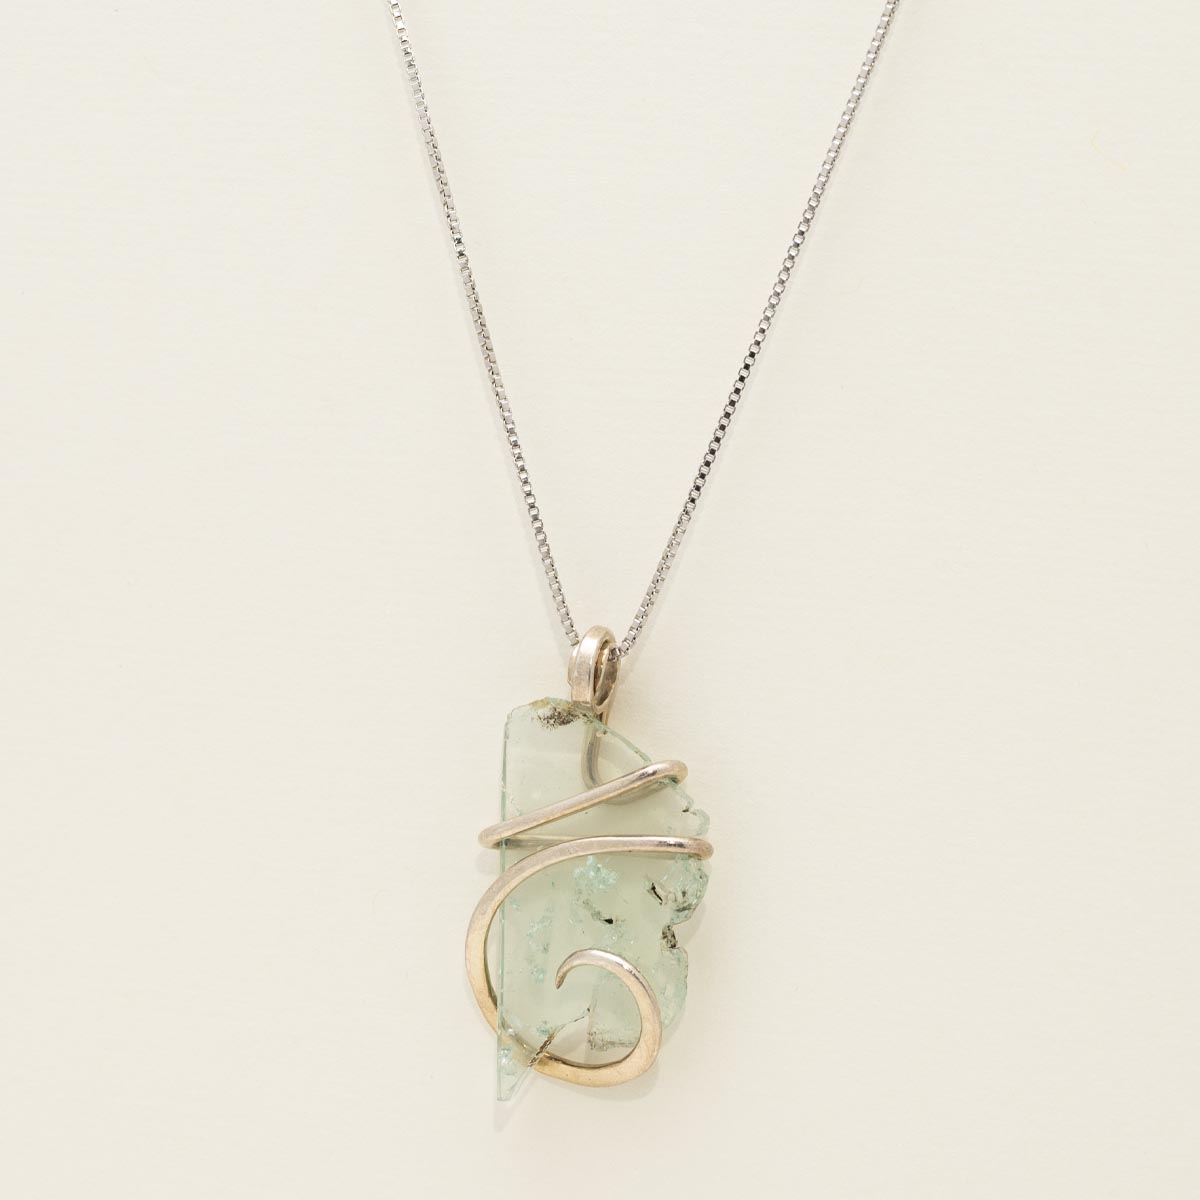 Maine Green Tourmaline Necklace in Sterling Silver